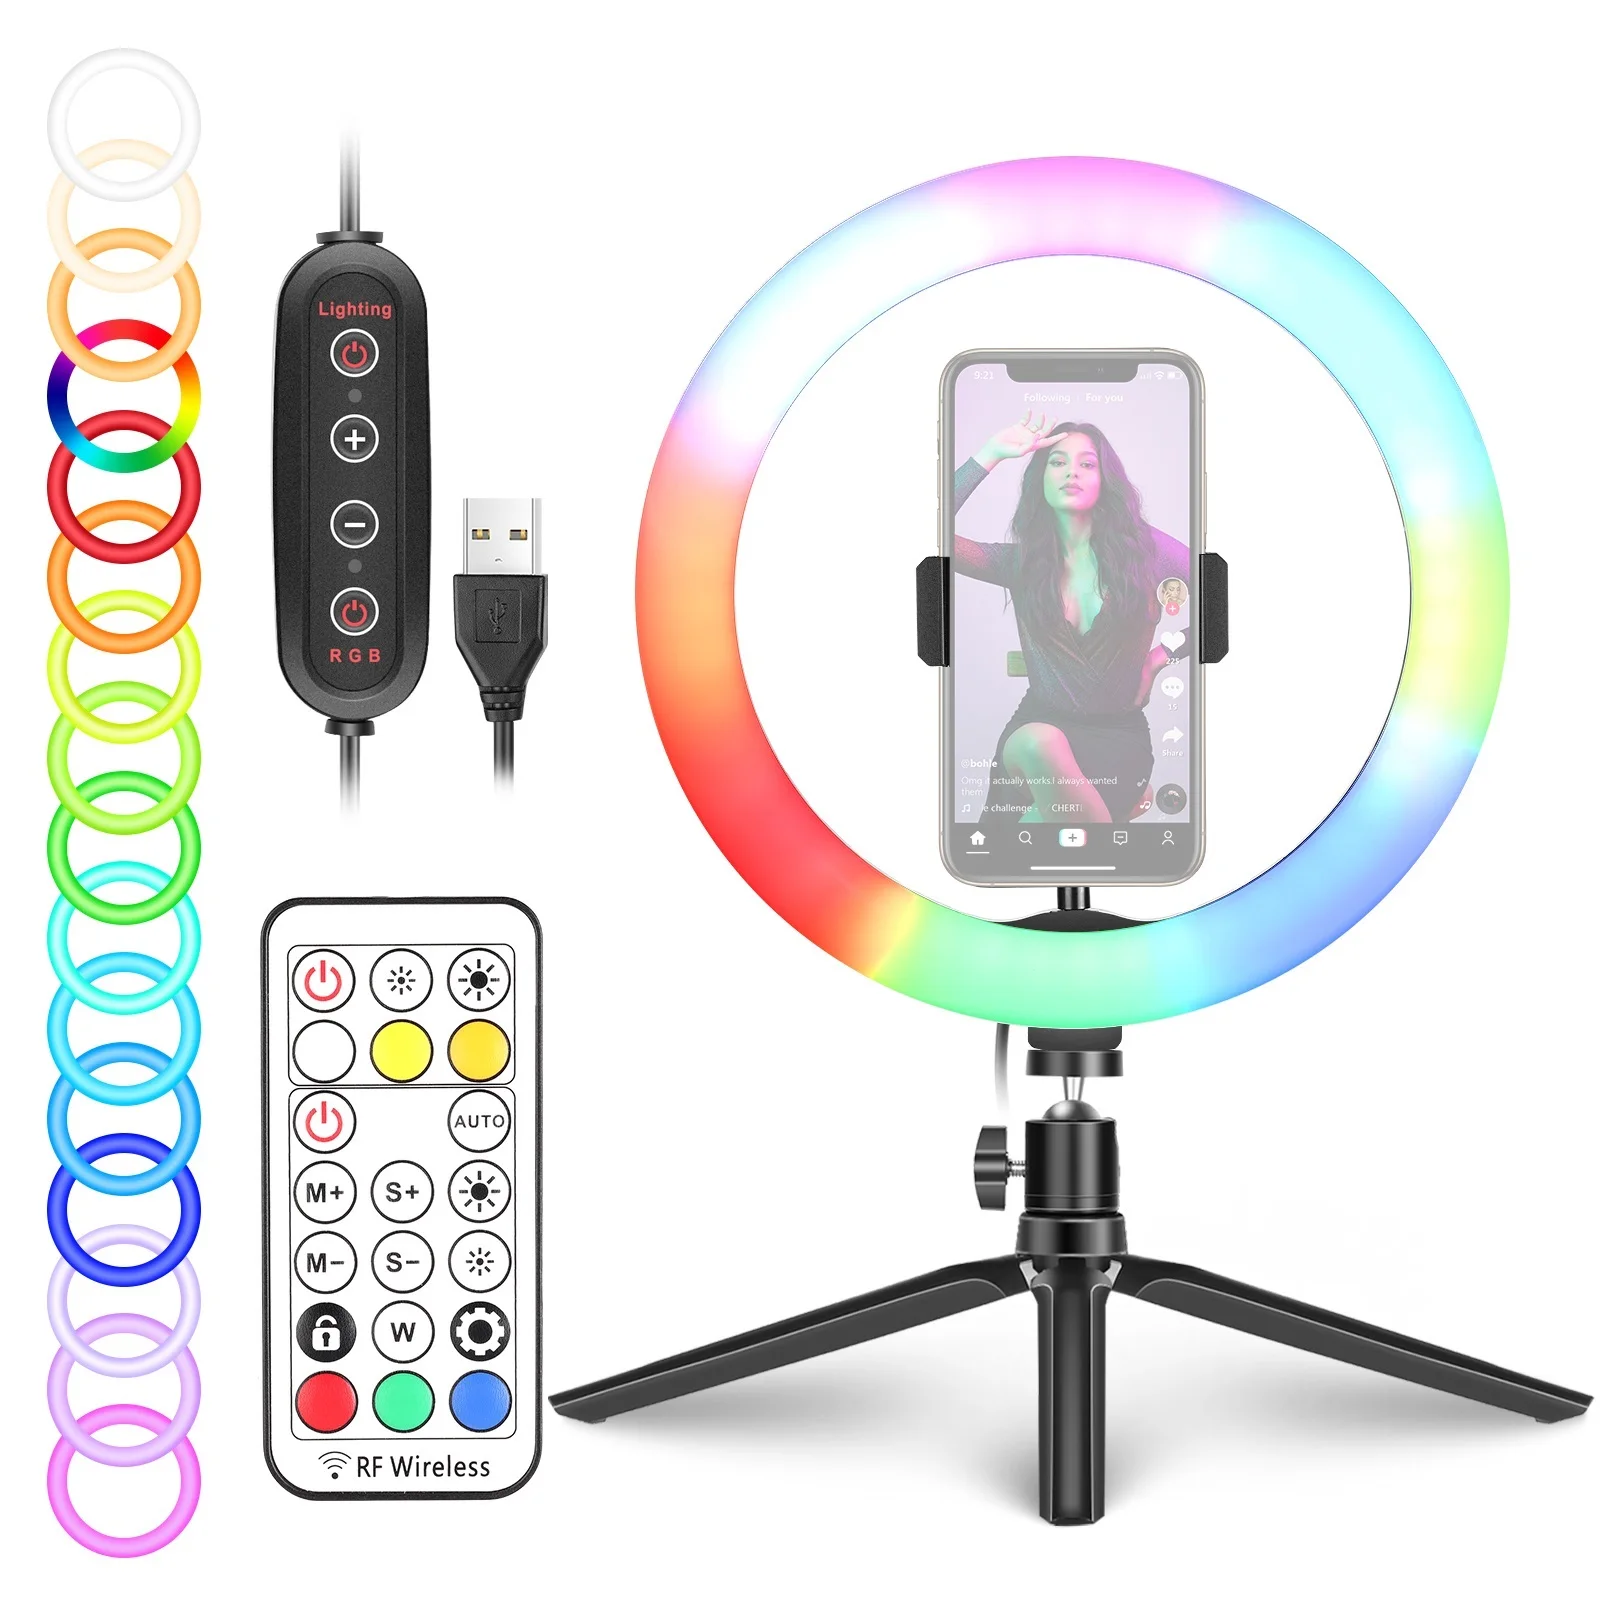 

Neewer 10-inch RGB Ring Light Selfie Light Remote Control,Desk Ringlight for Makeup/Live Streaming/YouTube/Video Shooting